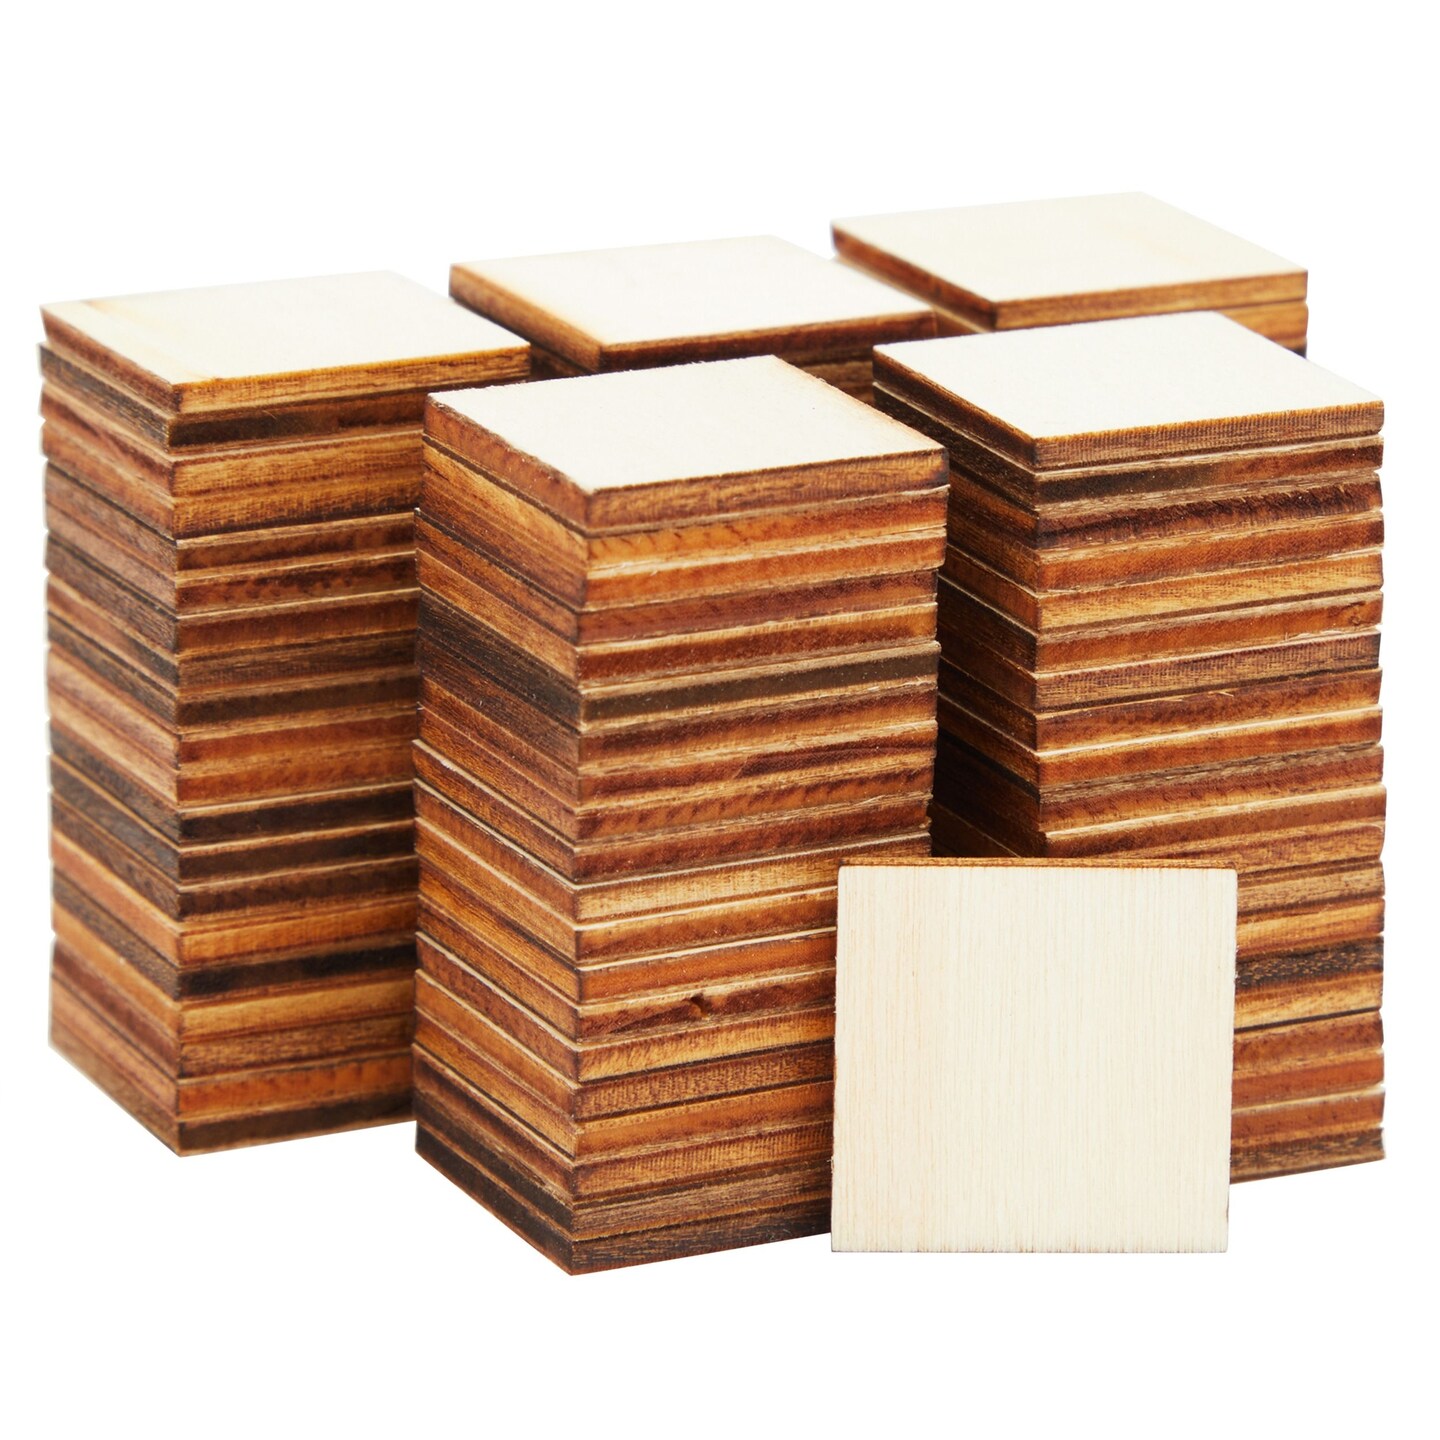 100 Pack 1x1 Wooden Squares for Crafts, Unfinished Wood Pieces for DIY Cutout Tiles